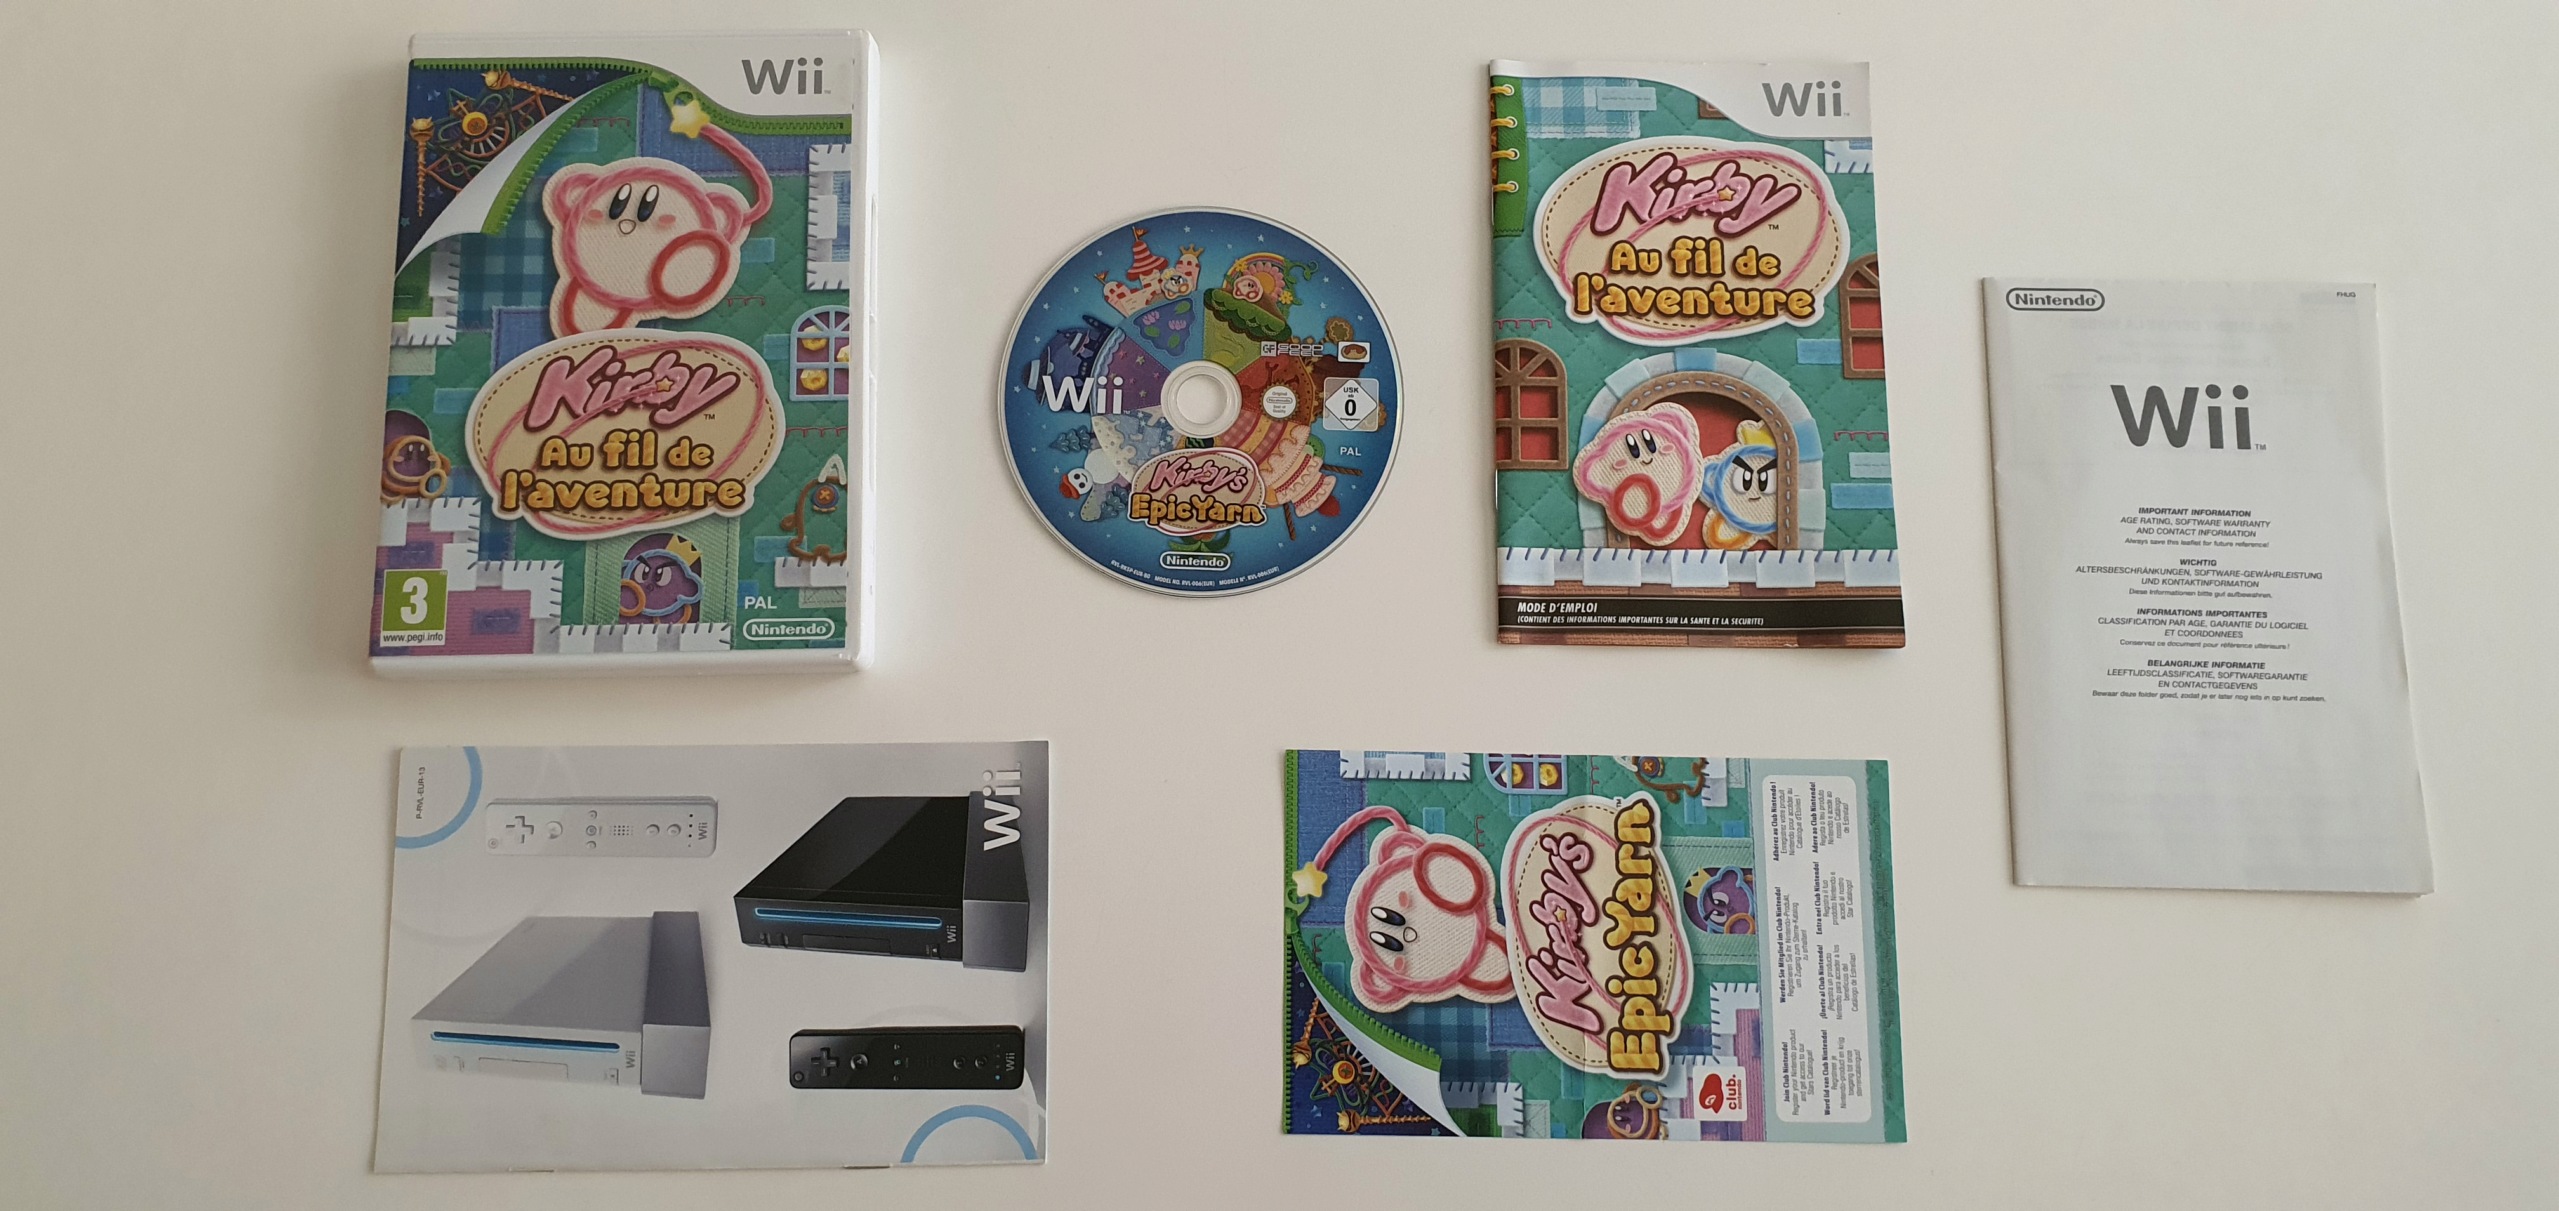 Dadou's Collection - Ajout de 4 jeux Wii U - Page 5 Kirby_10